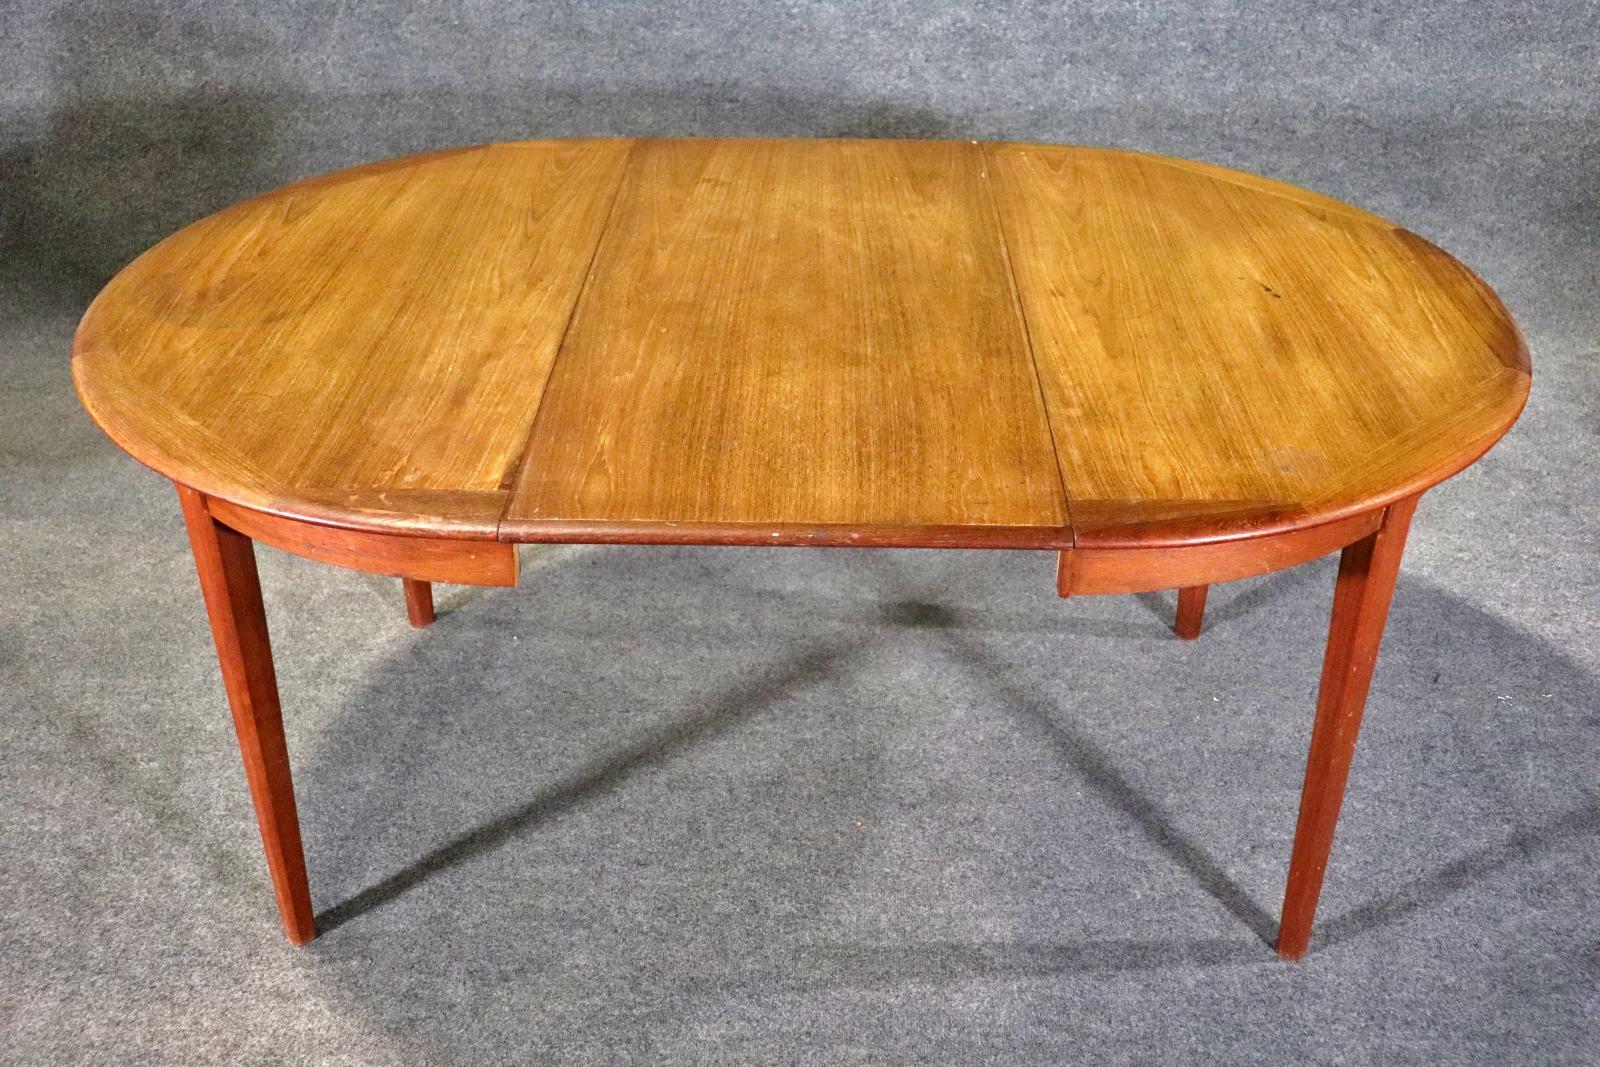 Danish made mid-century modern dining table with leaf. Warm teak grain throughout, with an attractive trim around the top. Leaf is 19